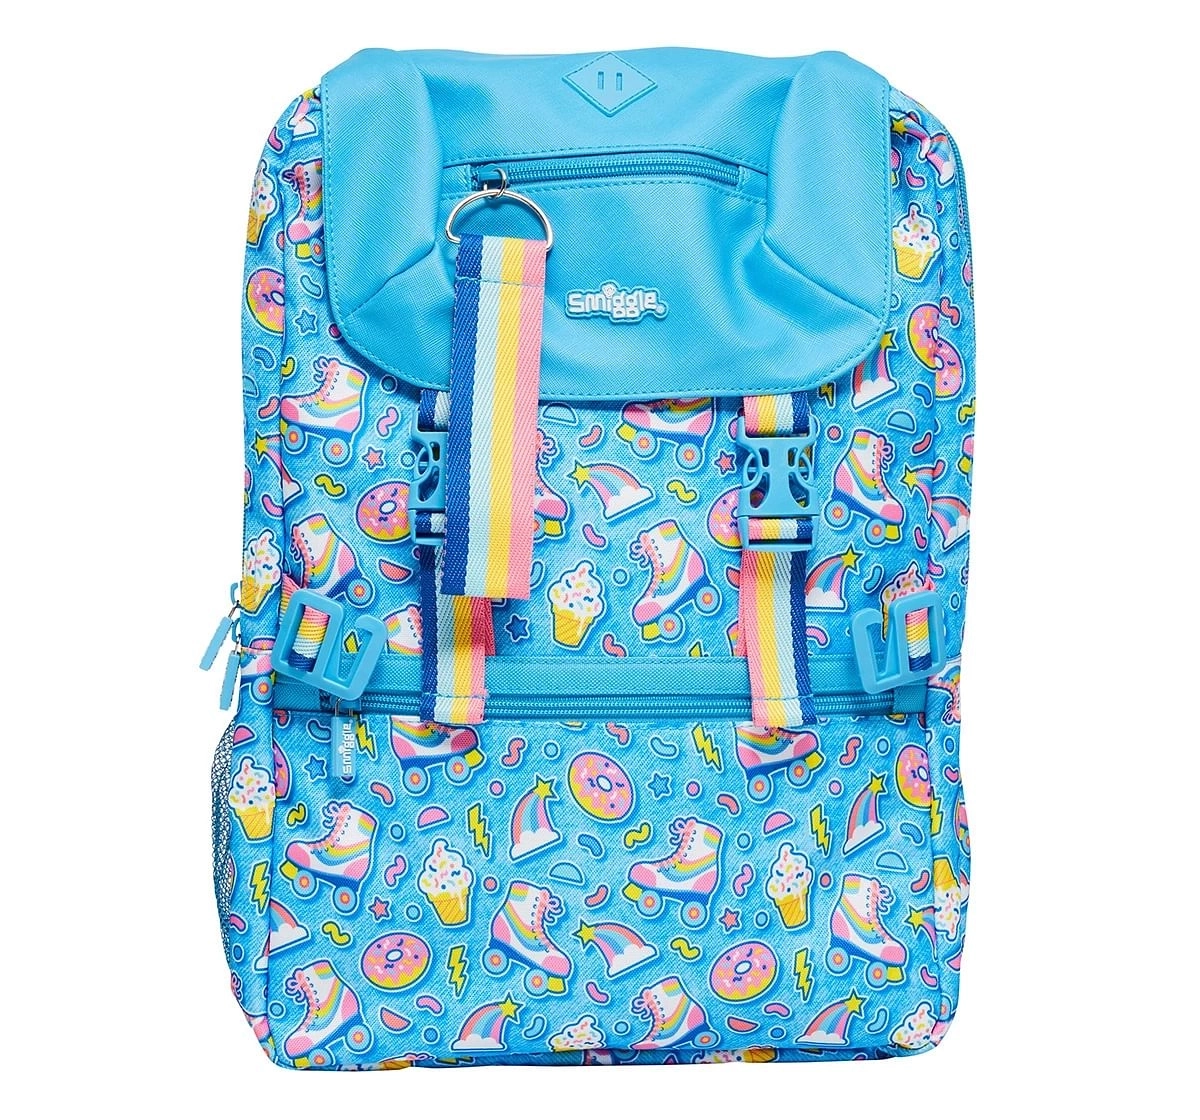 Smiggle Bright Side Foldover Attachable Colourful printed bag for Kids 3Y+, Multicolour